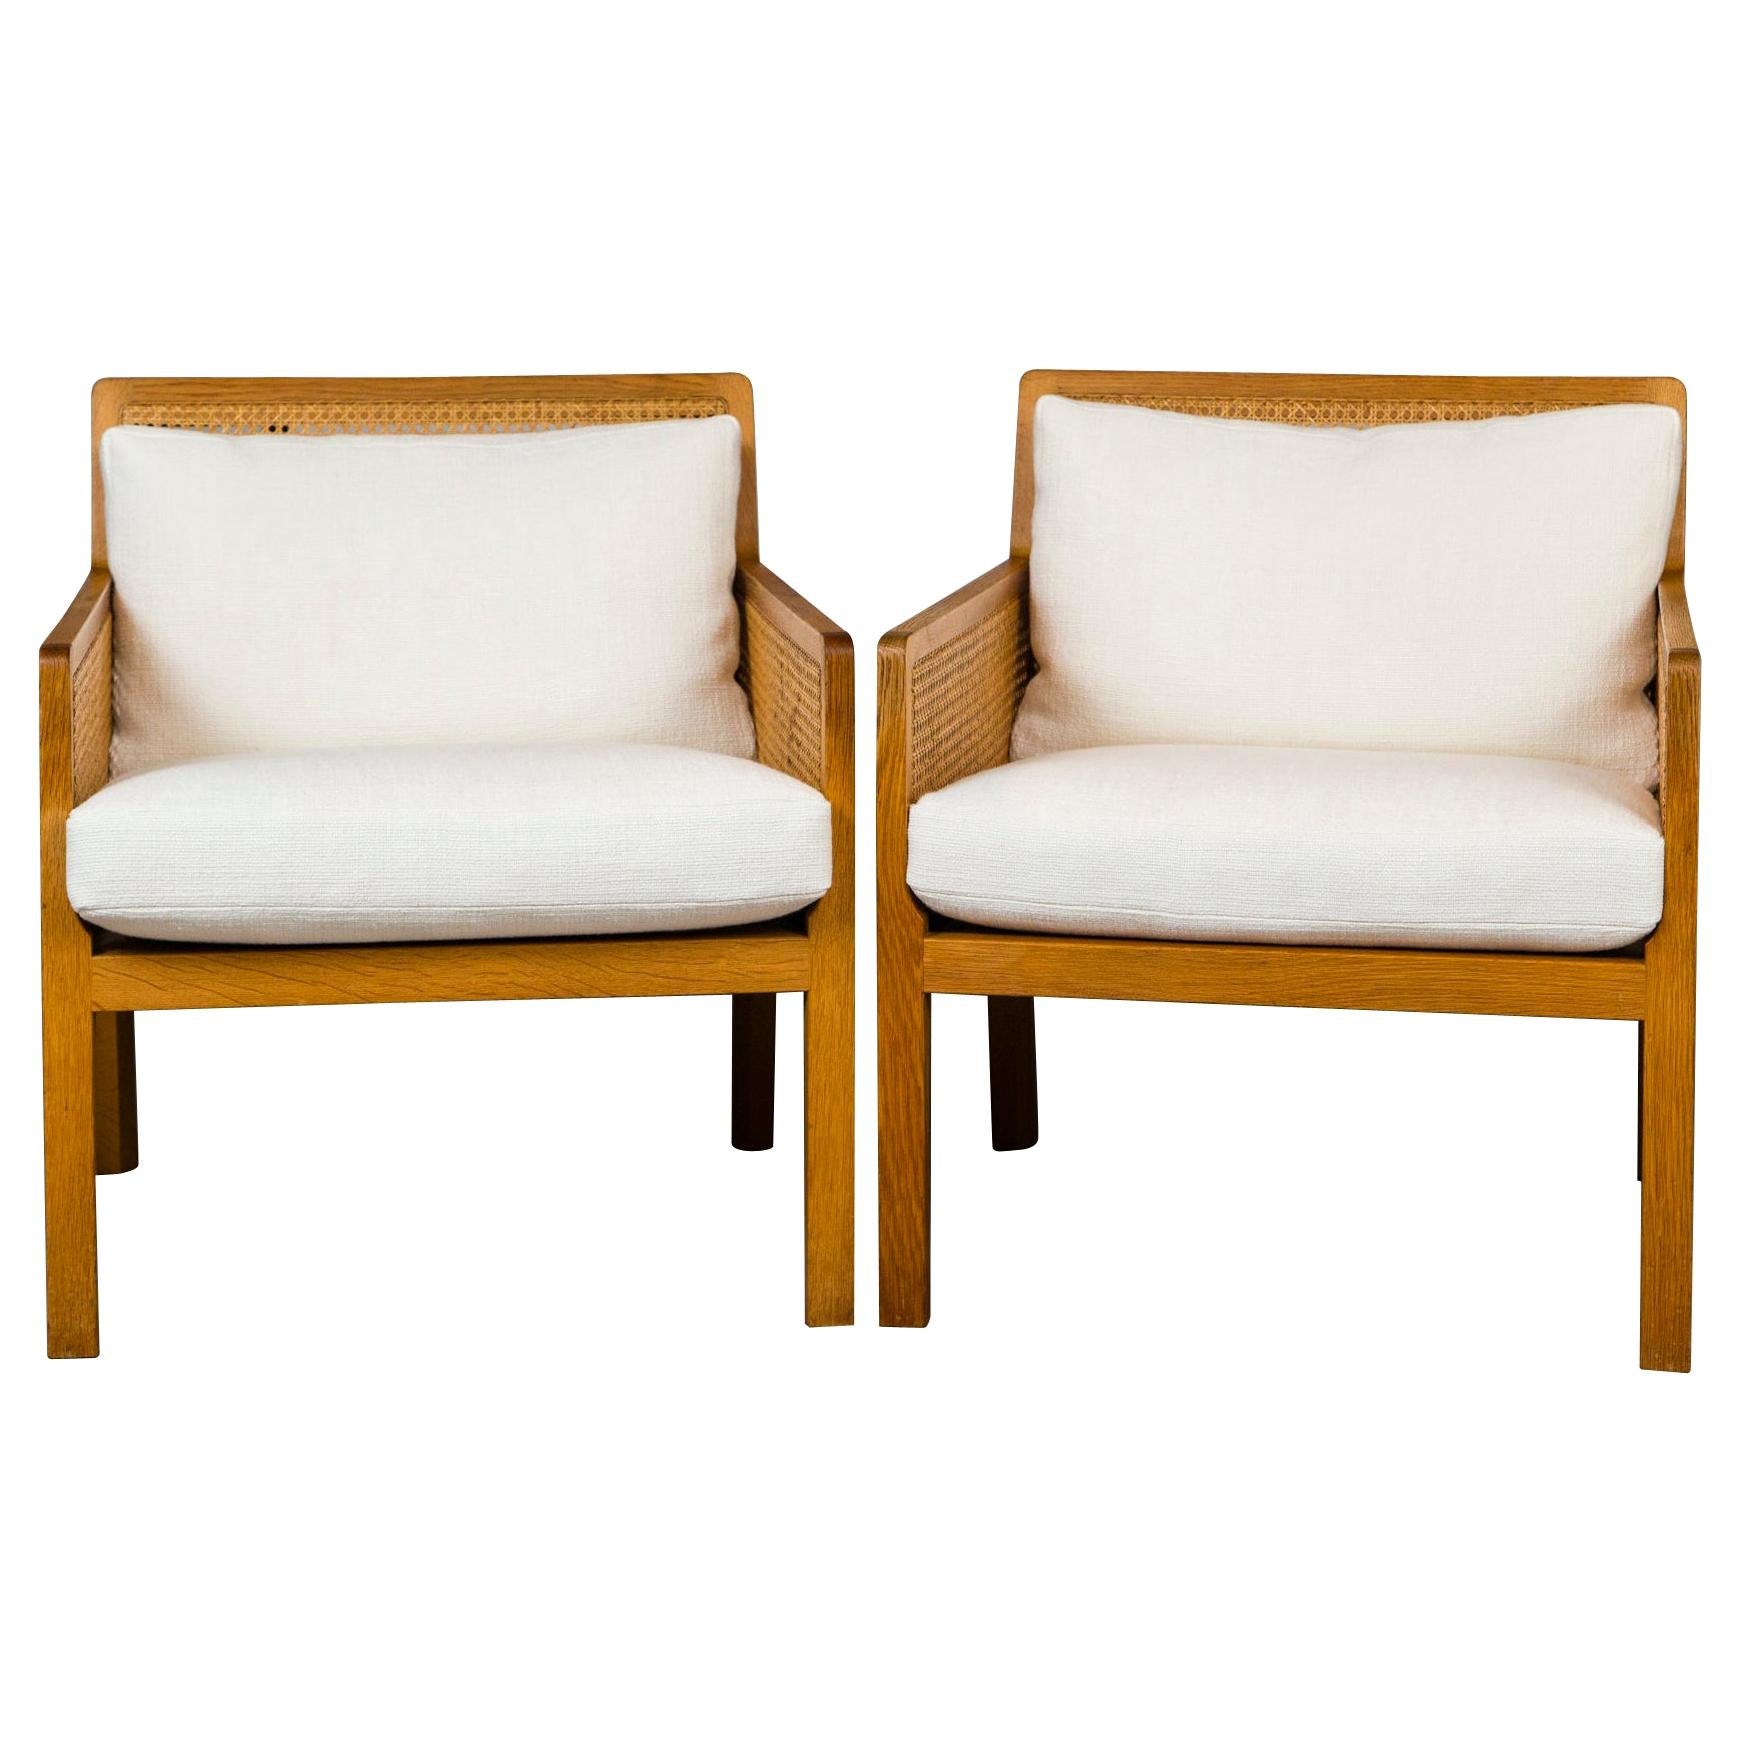 Pair of Bernt Petersen Caned Lounge Chairs Reupholstered in White Maharam Linen